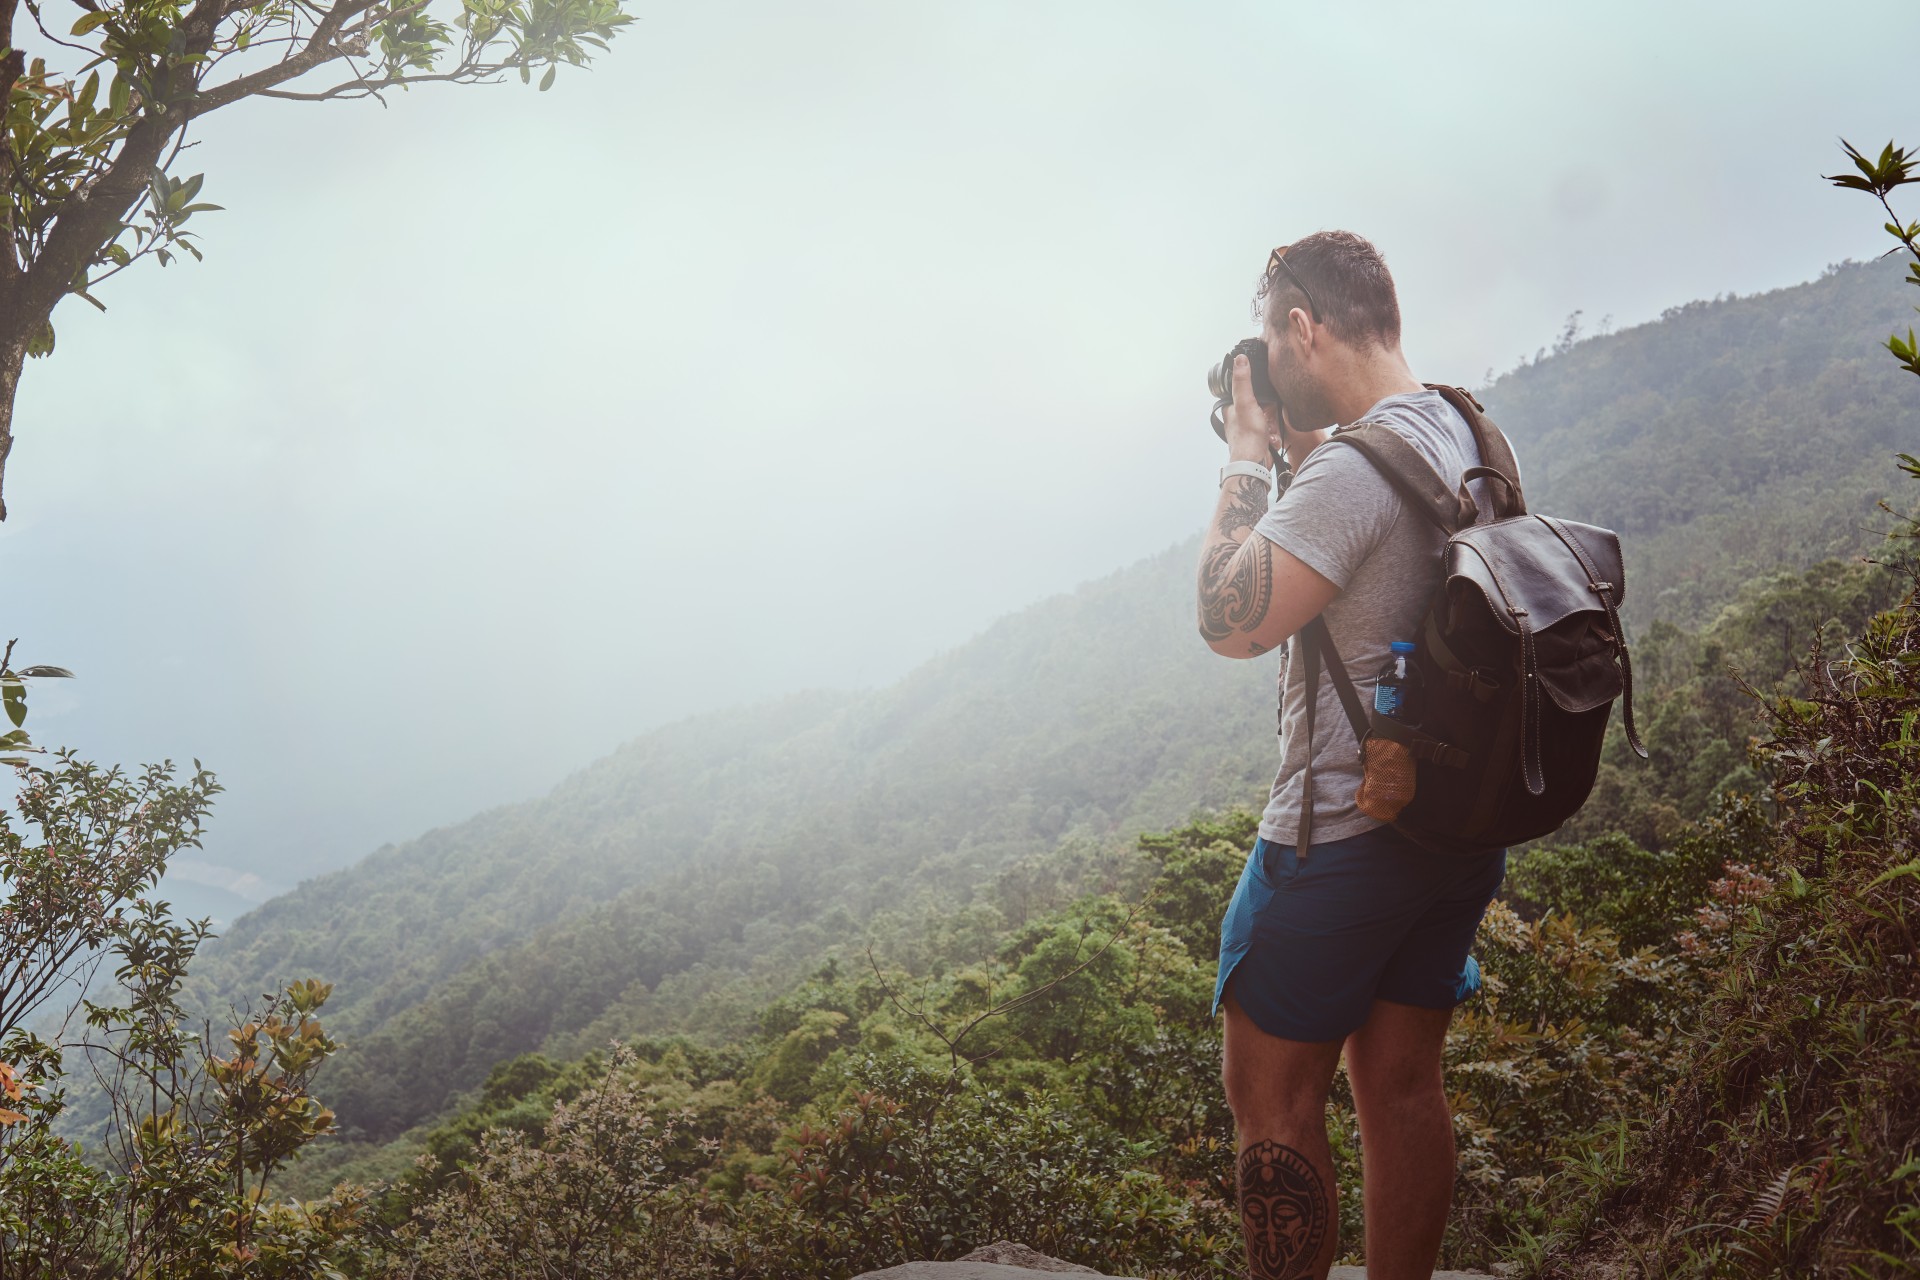 young-man-with-backpack-is-taking-photo-beautiful-nature-his-photo-camera-while-hiking-mountains.jpg